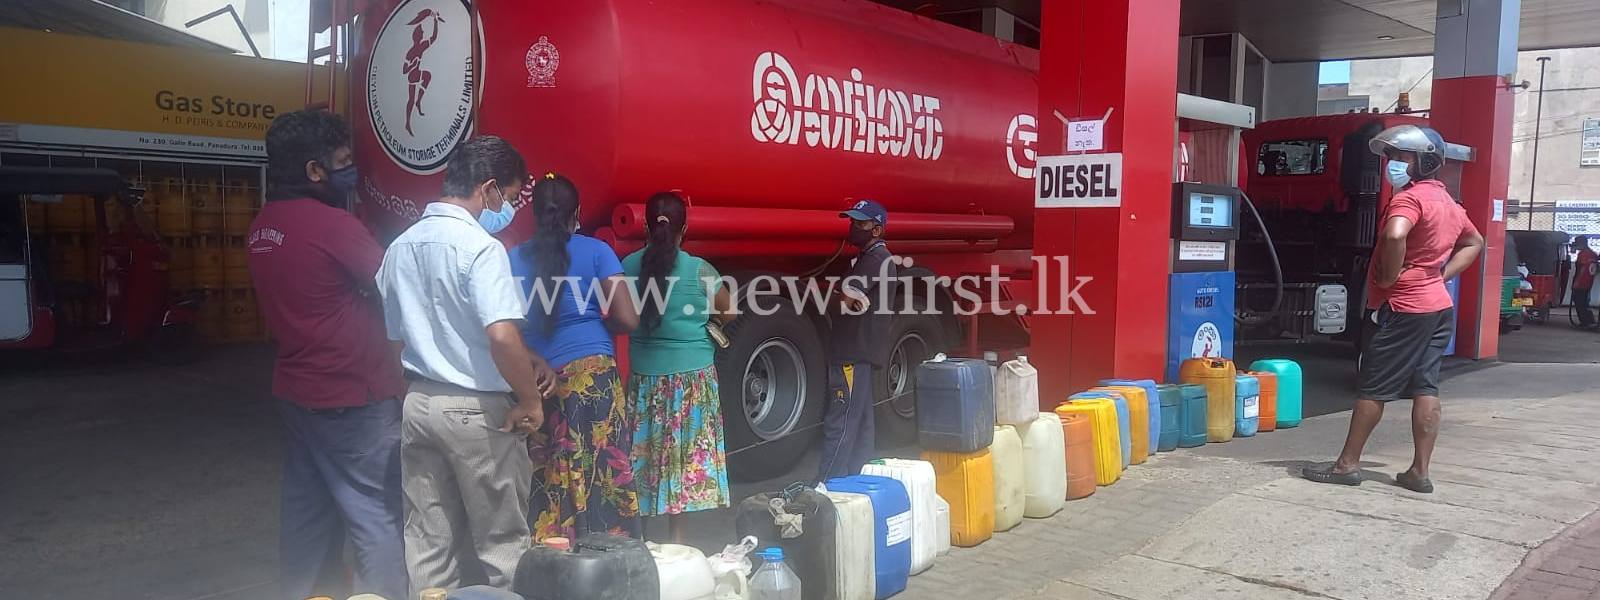 Limit issuing petrol for cans: Lokuge